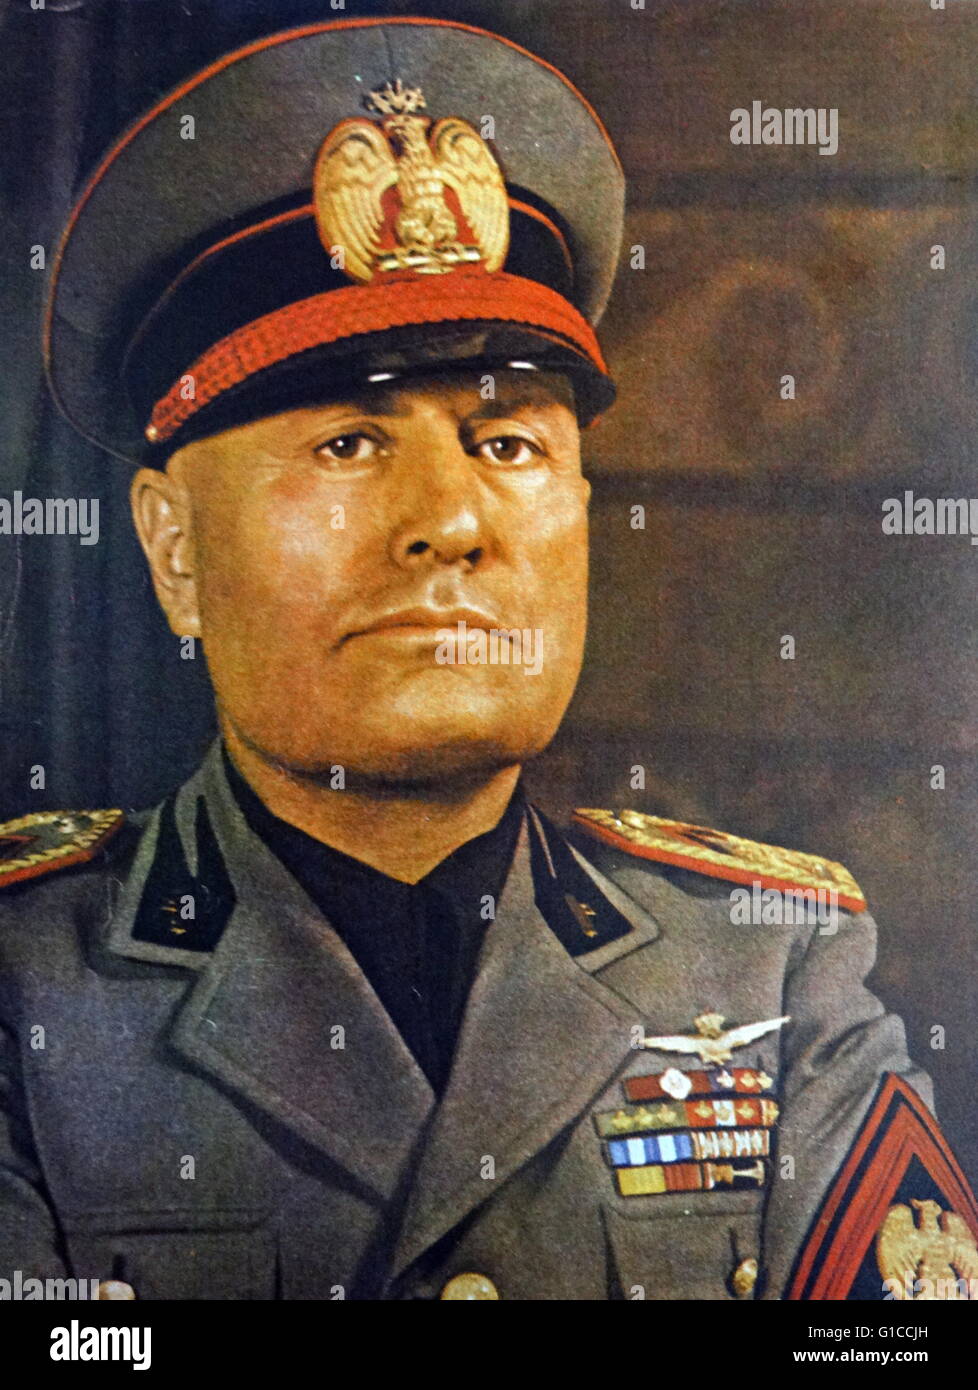 1930's uniformed portrait of Benito Mussolini (1883 – 28 April 1945). Italian politician, journalist, and leader of the National Fascist Party. Prime Minister from 1922 until his ousting in 1943 Stock Photo